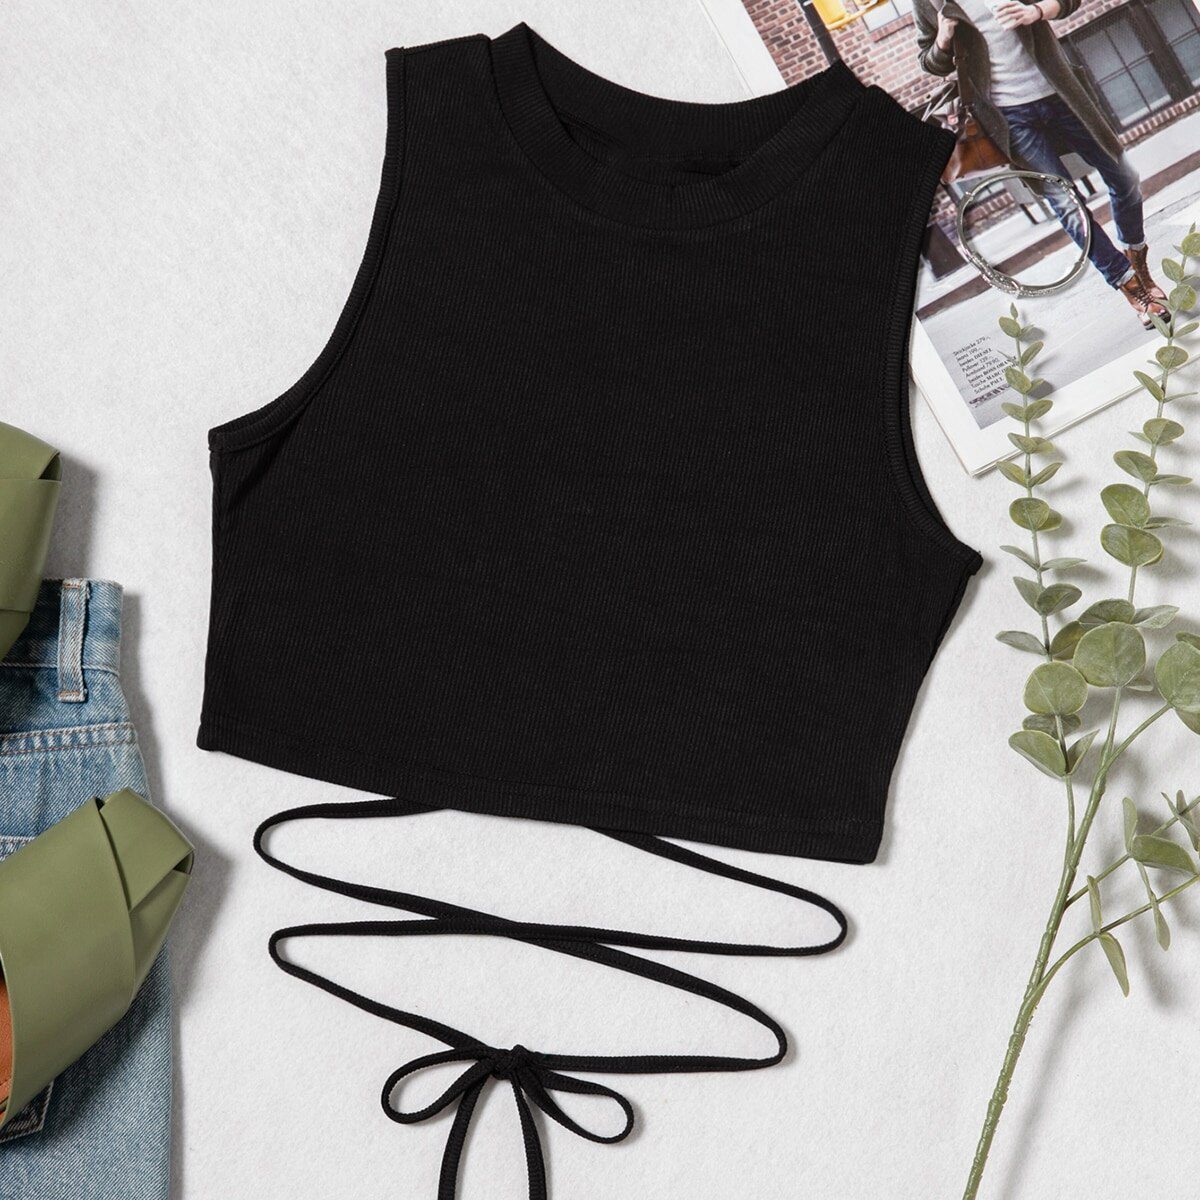 Black Round Neck Plain Lace Up Waist Sleeveless Tank Top With Medium Stretch in T-shirts & Tops